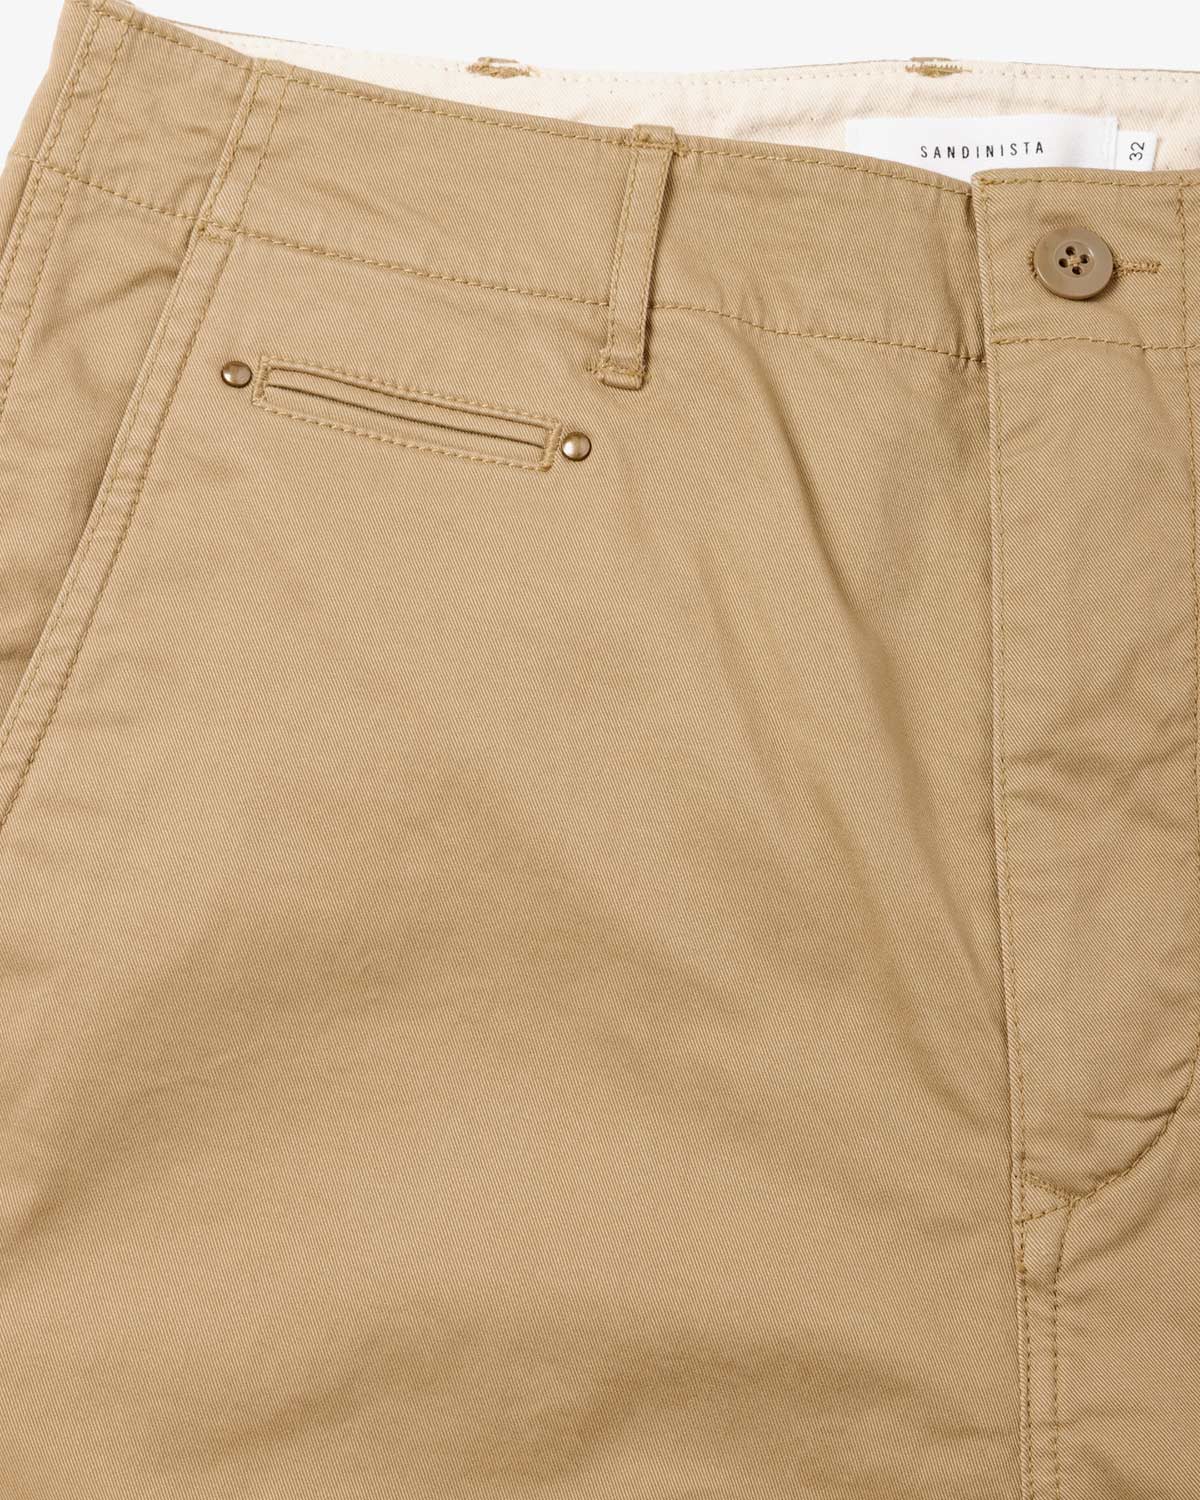 CHINO PANTS - STRETCH EASY FIT TAPERED